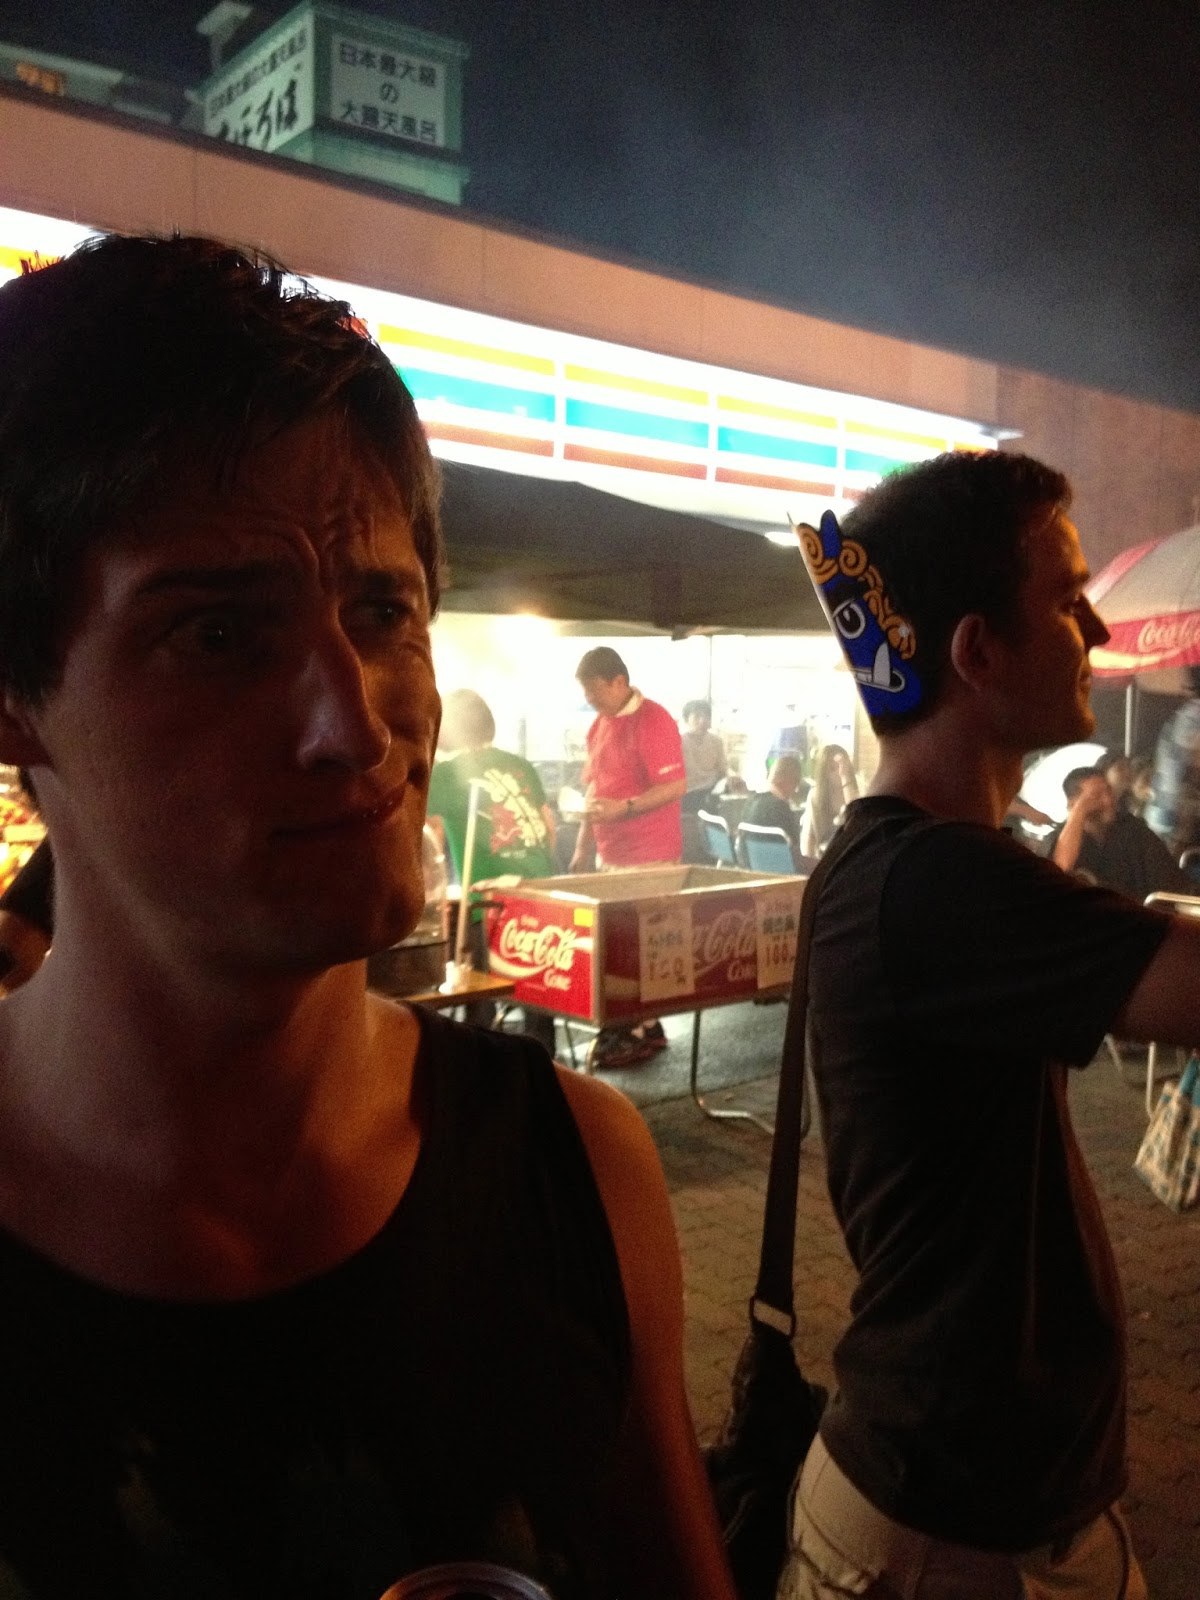 My friend Rory, making a quizzical face at something just outside the frame, standing in front of a brightly-lit 7-11